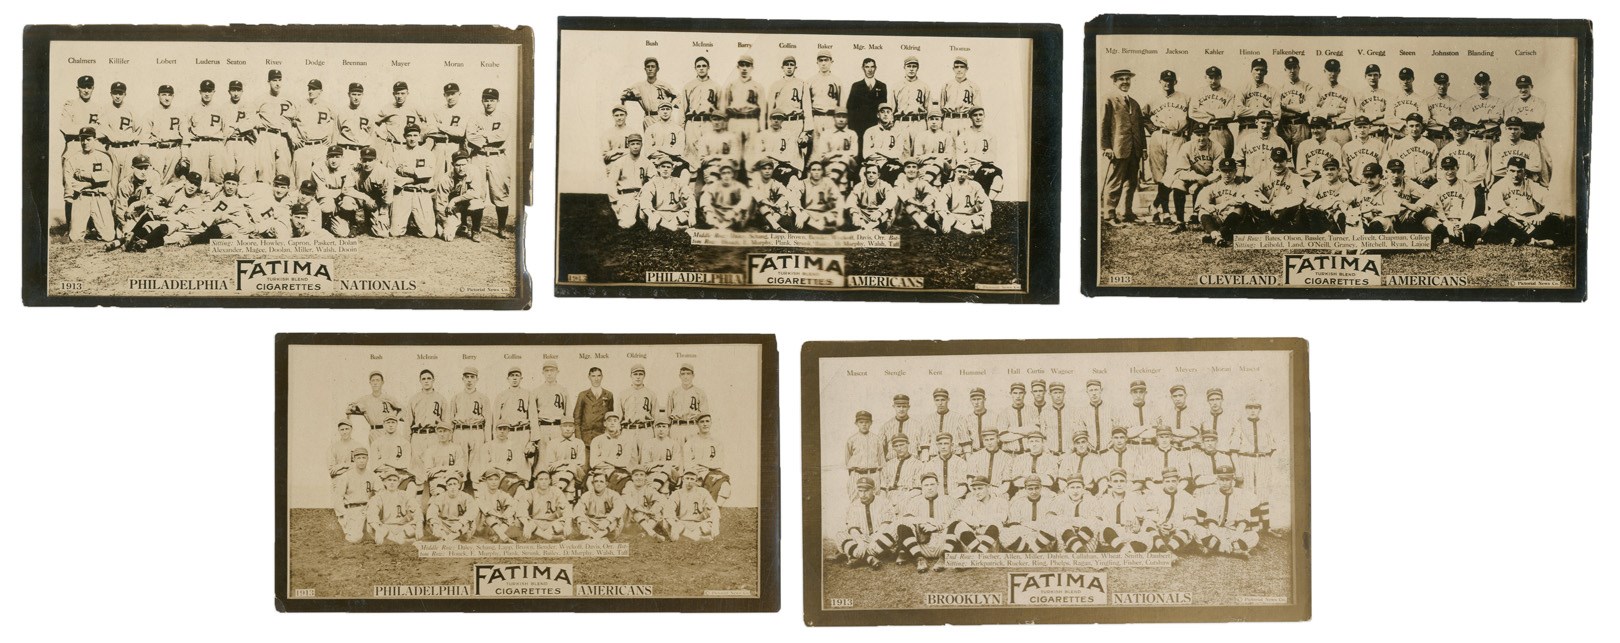 Baseball and Trading Cards - 1913 T200 Fatima Naps, Phillies, Athletics & Dodgers Team Cards with Joe Jackson